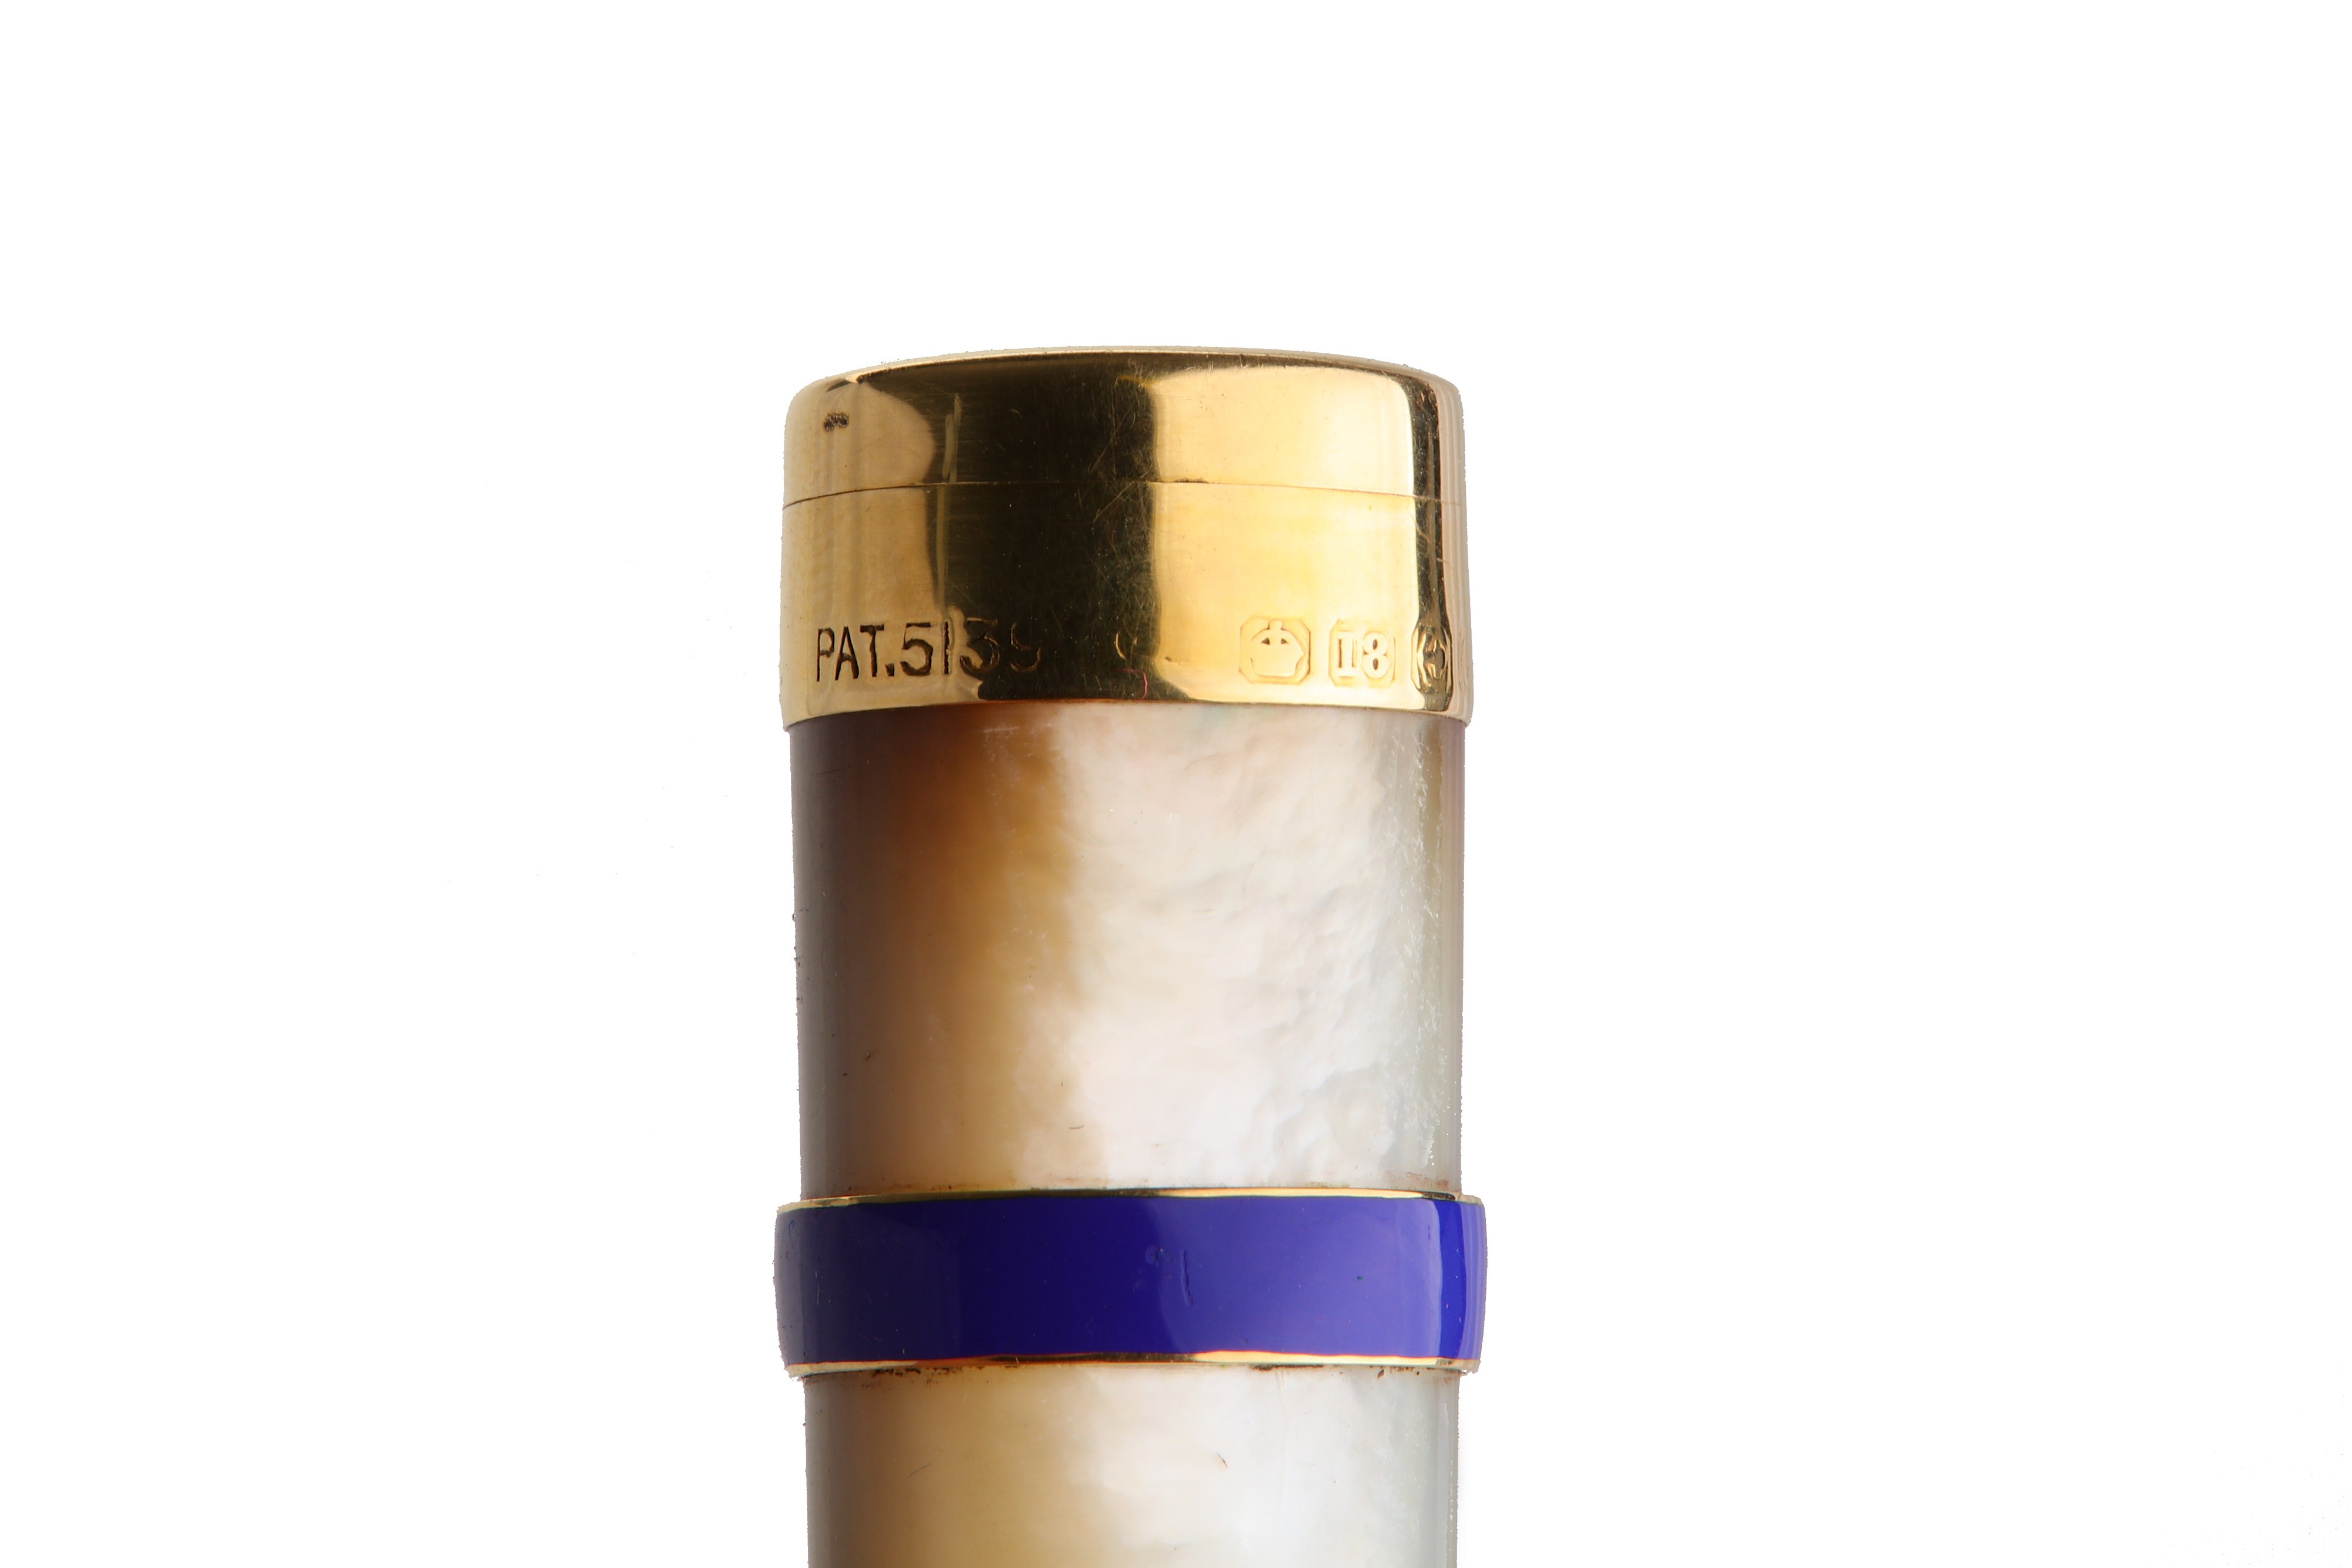 A cased George VI 18 carat gold and enamel mounted mother of pearl cheroot / cigarette holder, Birmi - Image 3 of 3